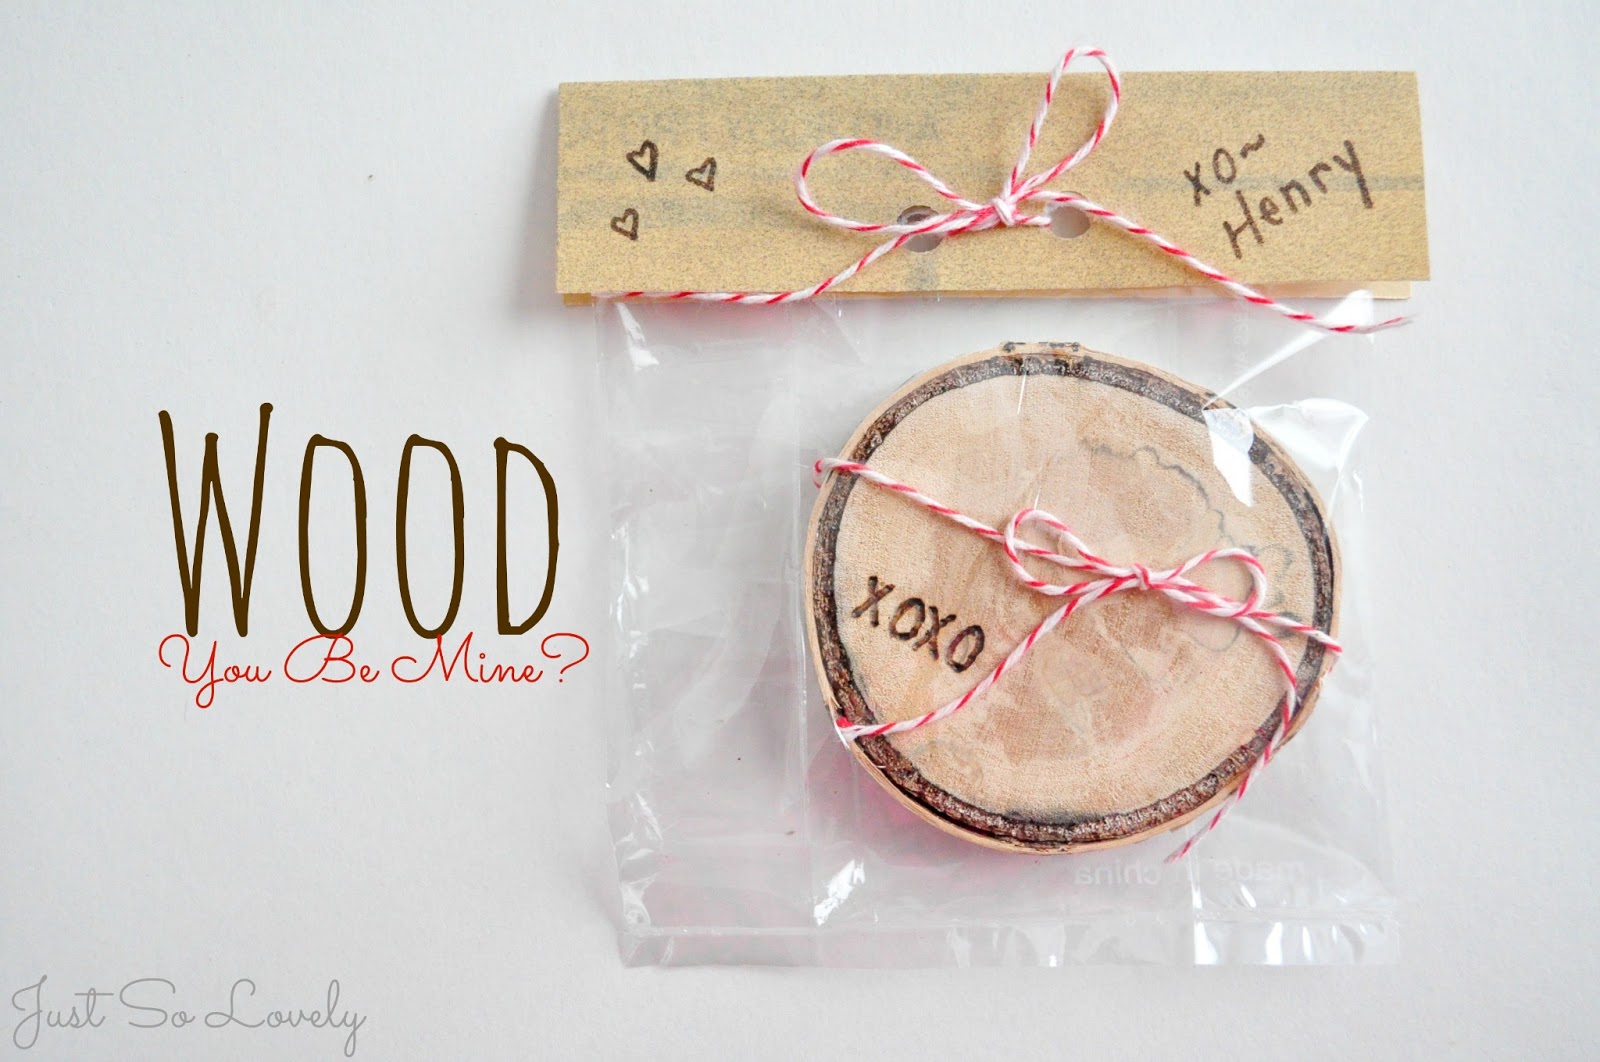 Just So Lovely: Wood You Be Mine? An Easy Wooden Valentine